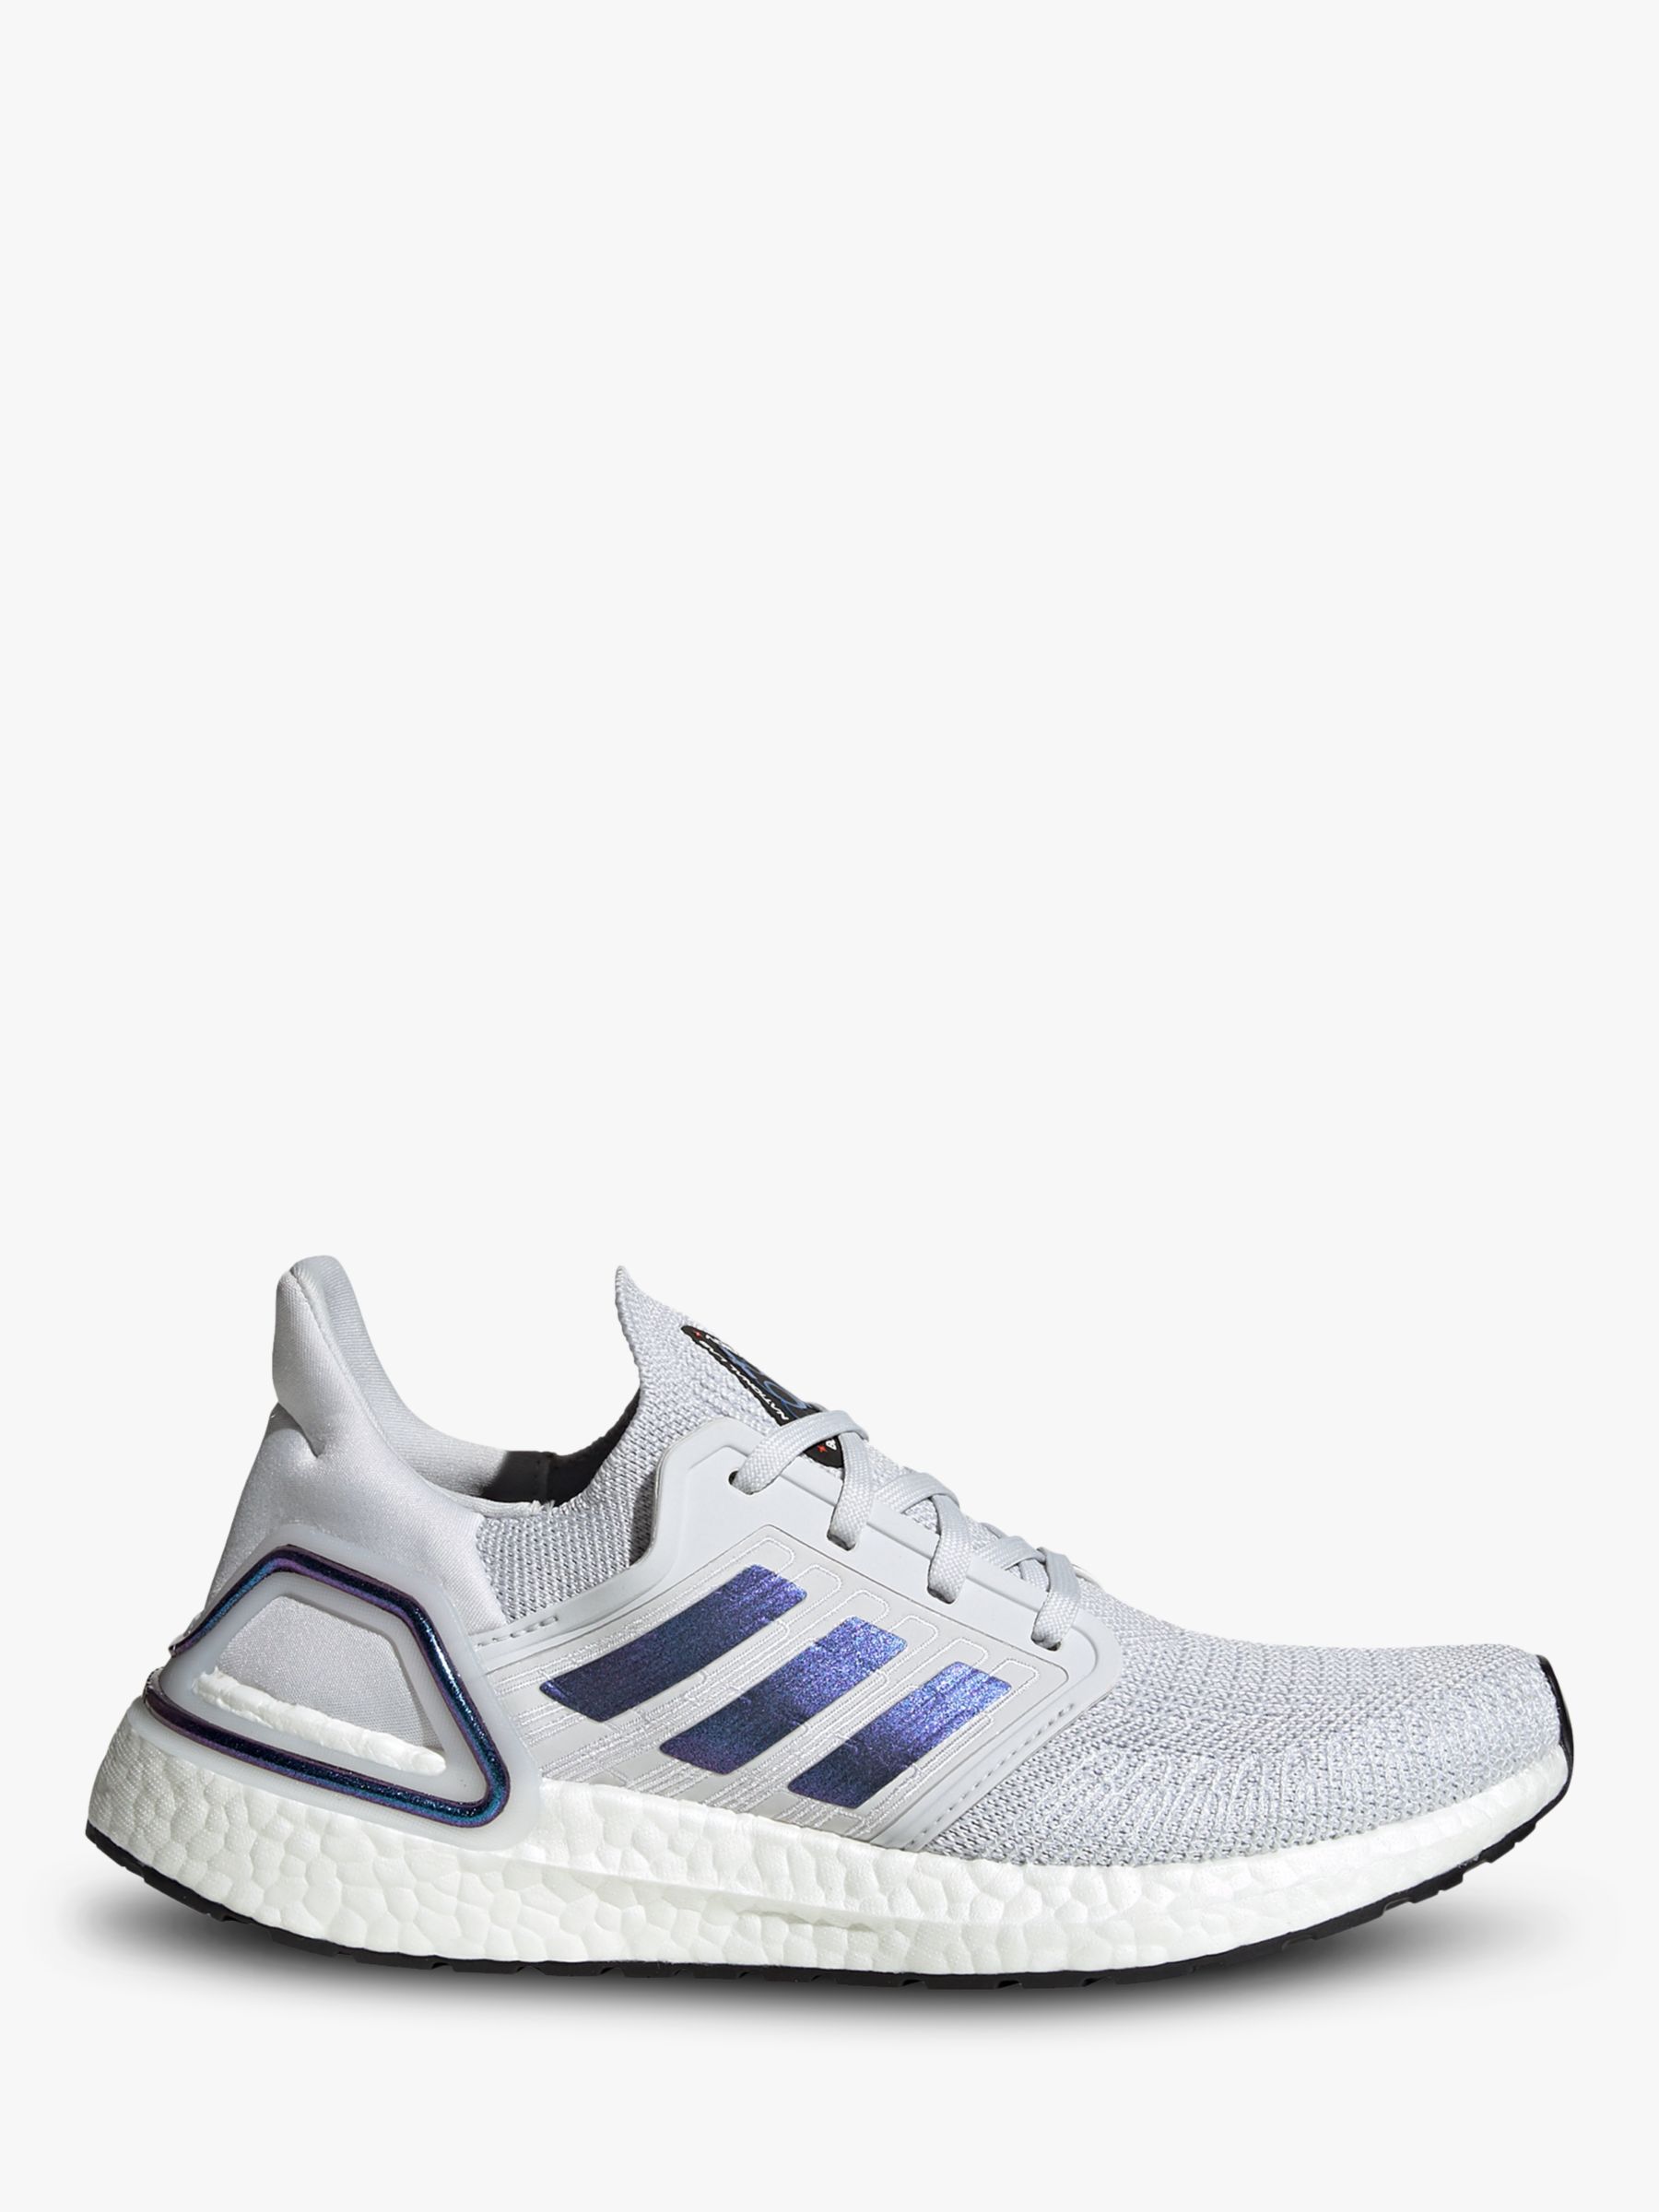 adidas running shoes boost